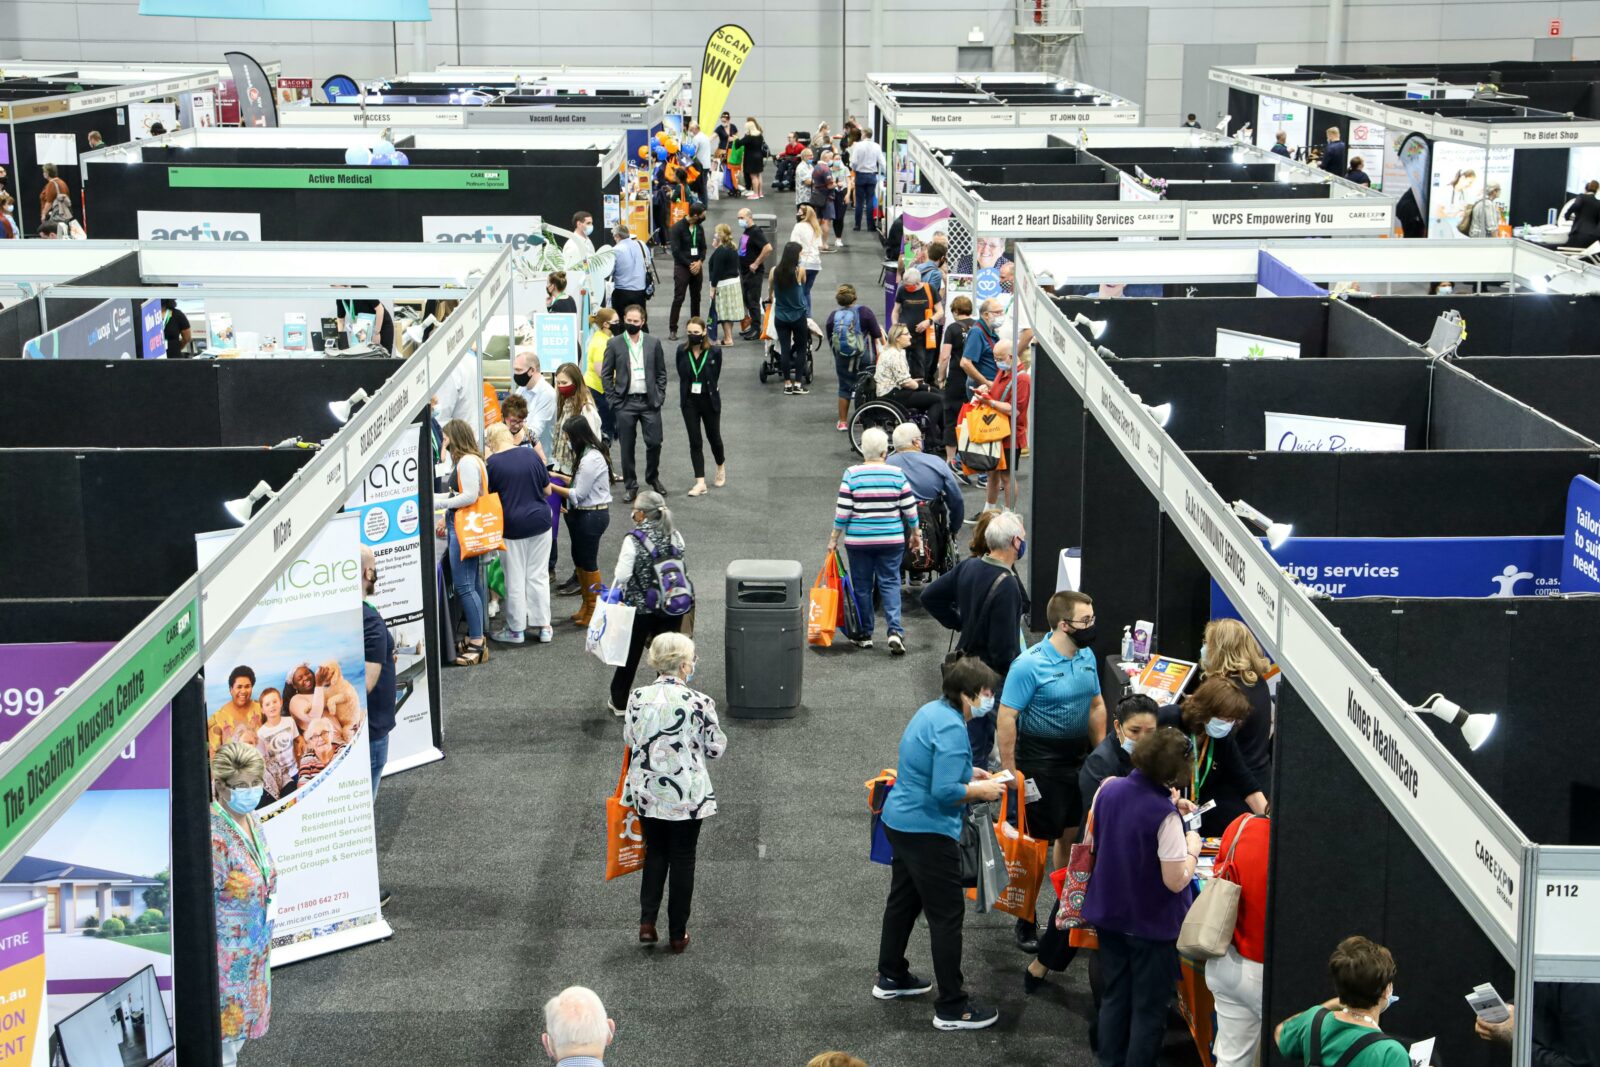 Care Expo crowds